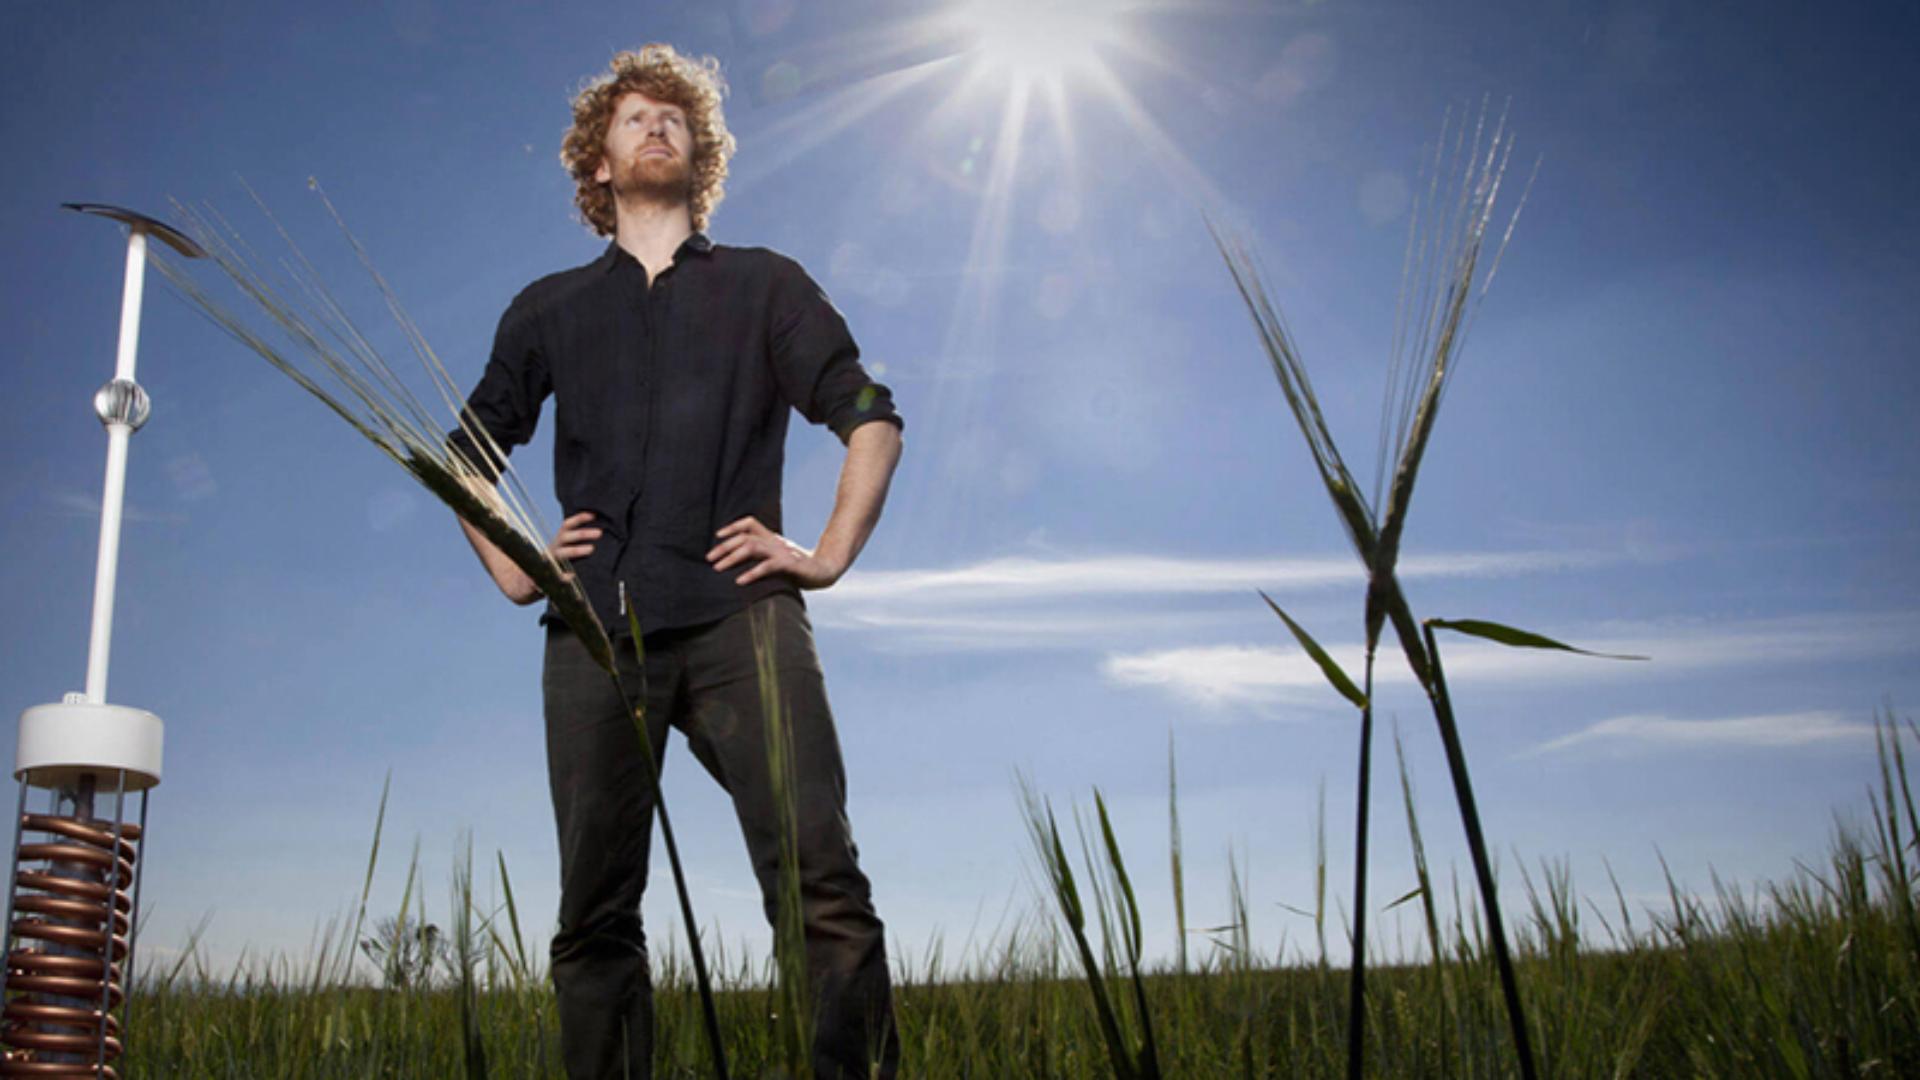 Dyson award winner standing in wheat field beside his invention